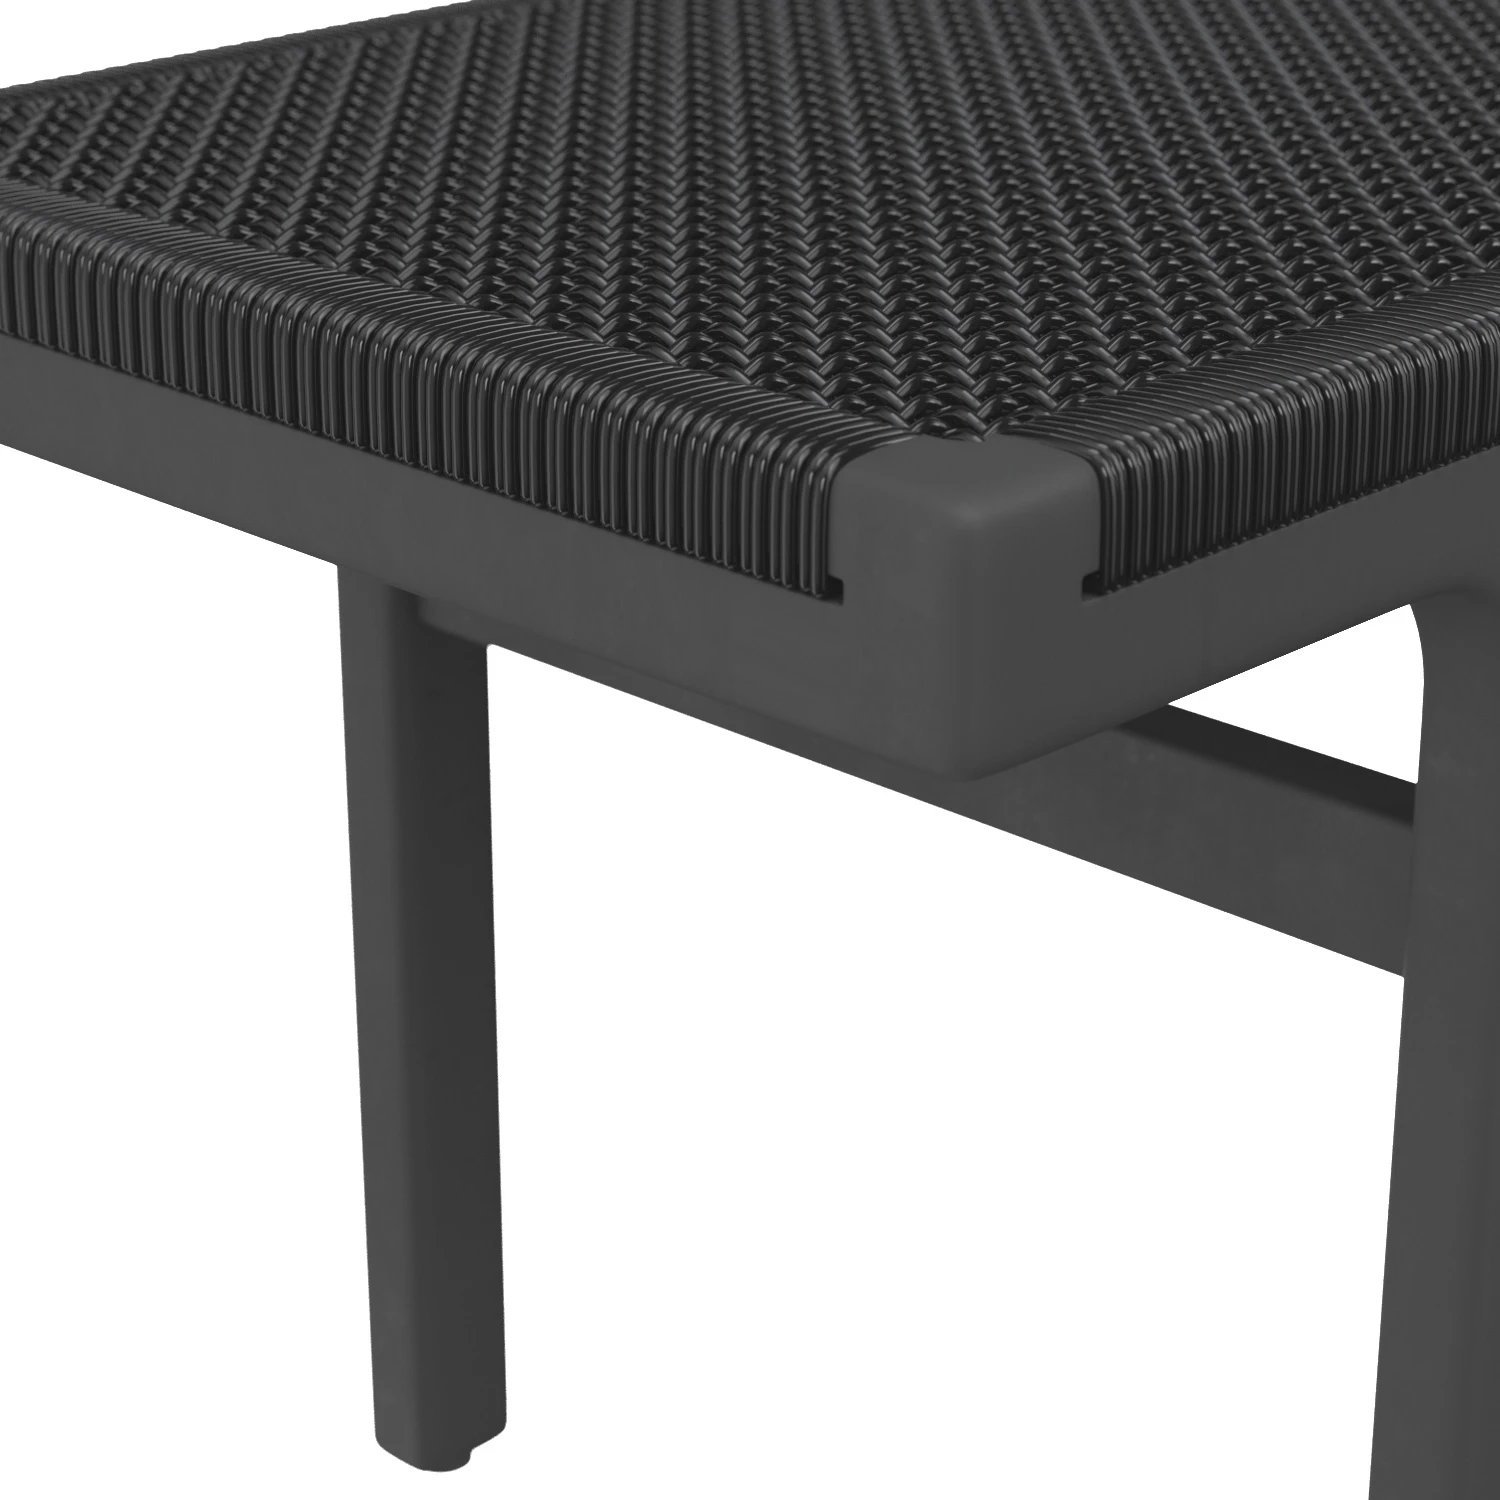 Large Black Leather Woven Bench 3D Model_05